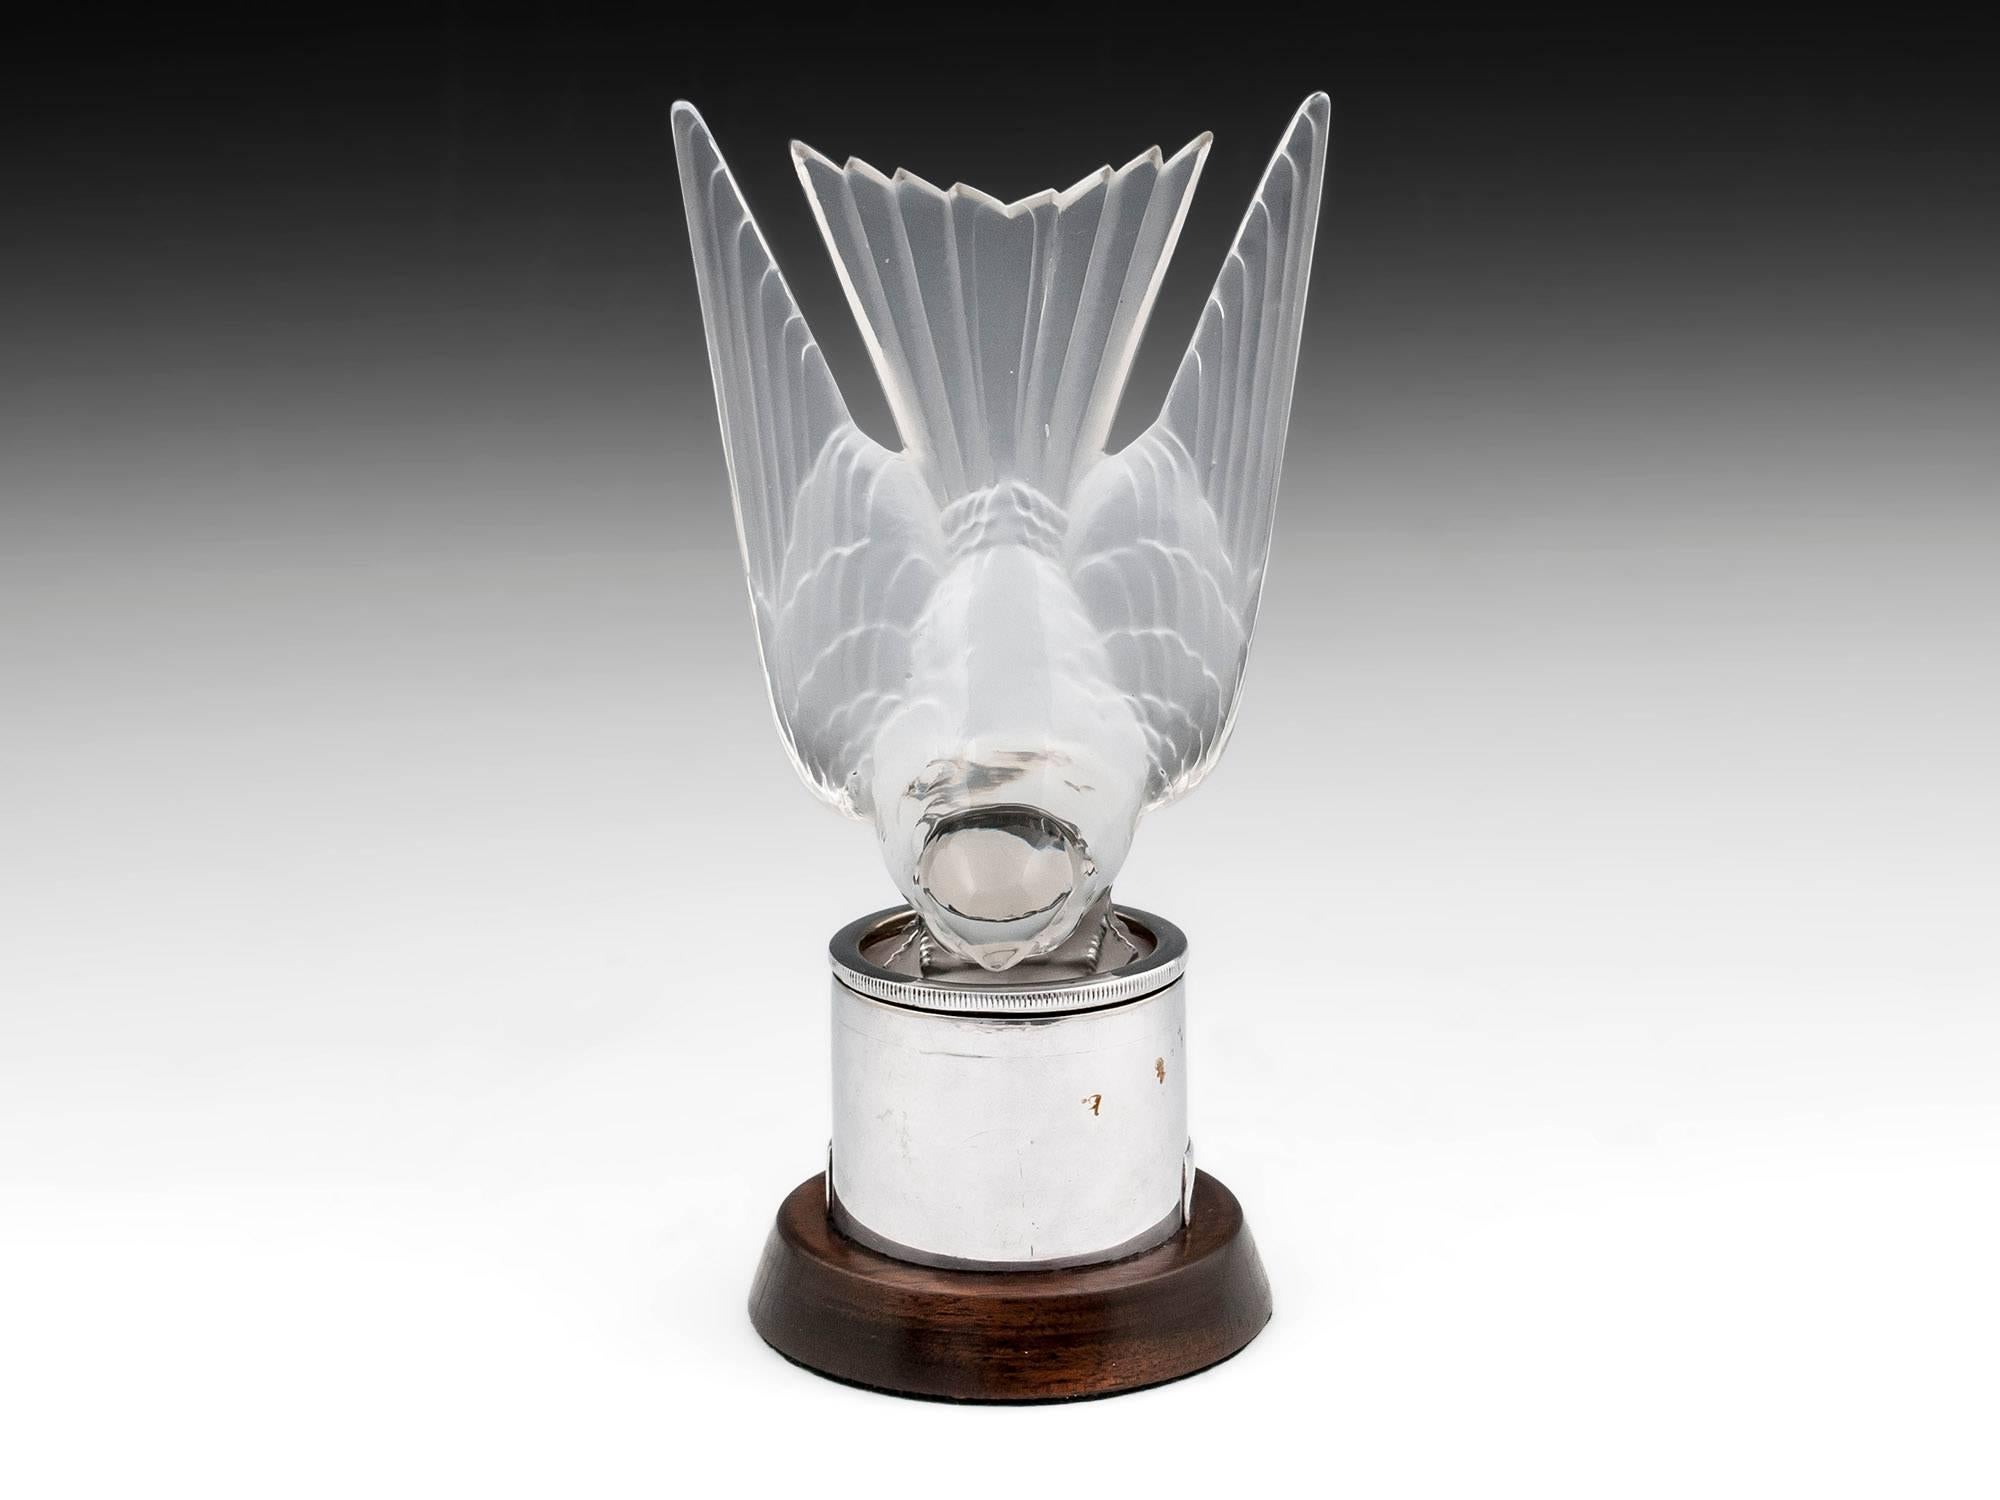 Rene Lalique Hirondelle (Swallow) model number #1143 with clear frosted finish. Markings on the base have been polished to accommodate the original chrome radiator mount complete with bulb and wires for illumination when attached to a car. 

This